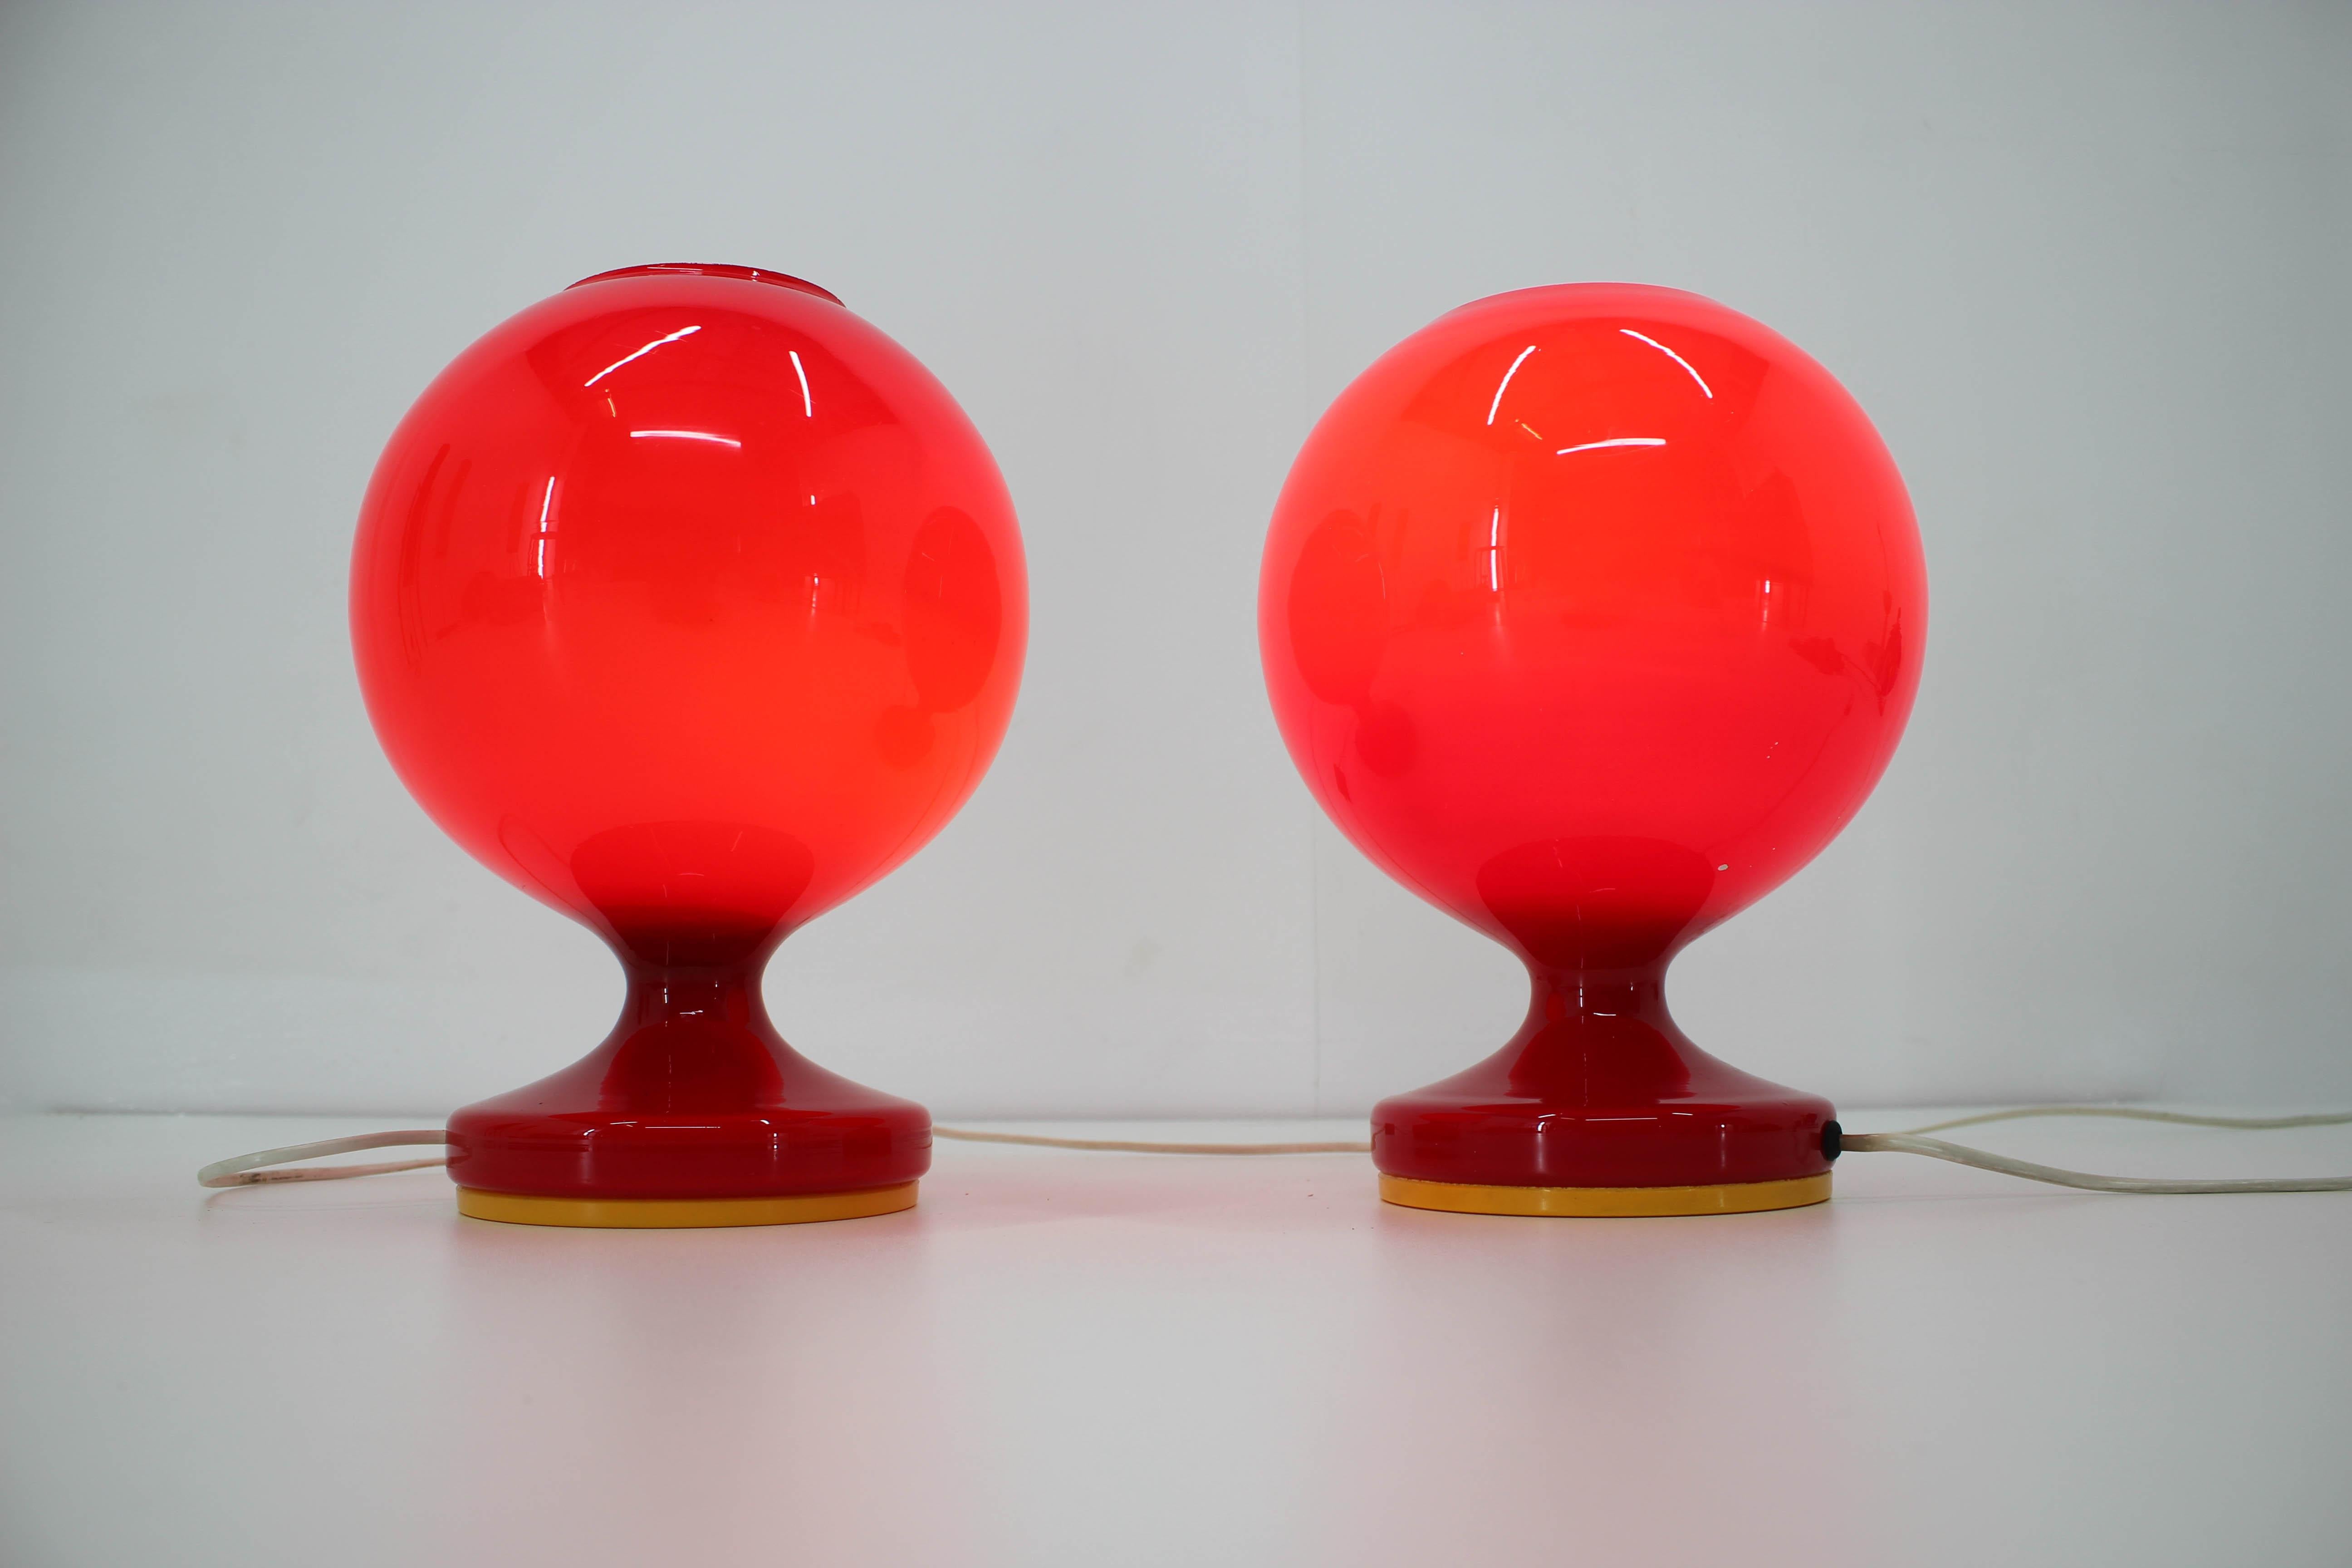 Set of two red glass table lamp designed by Stepan Tabery for Osvetlovaci sklo, Valasske Mezirici.
Good original condition, small losses on the edge of one shade seen on photo
60w, E27 or E26 bulb
Labeled.   
 